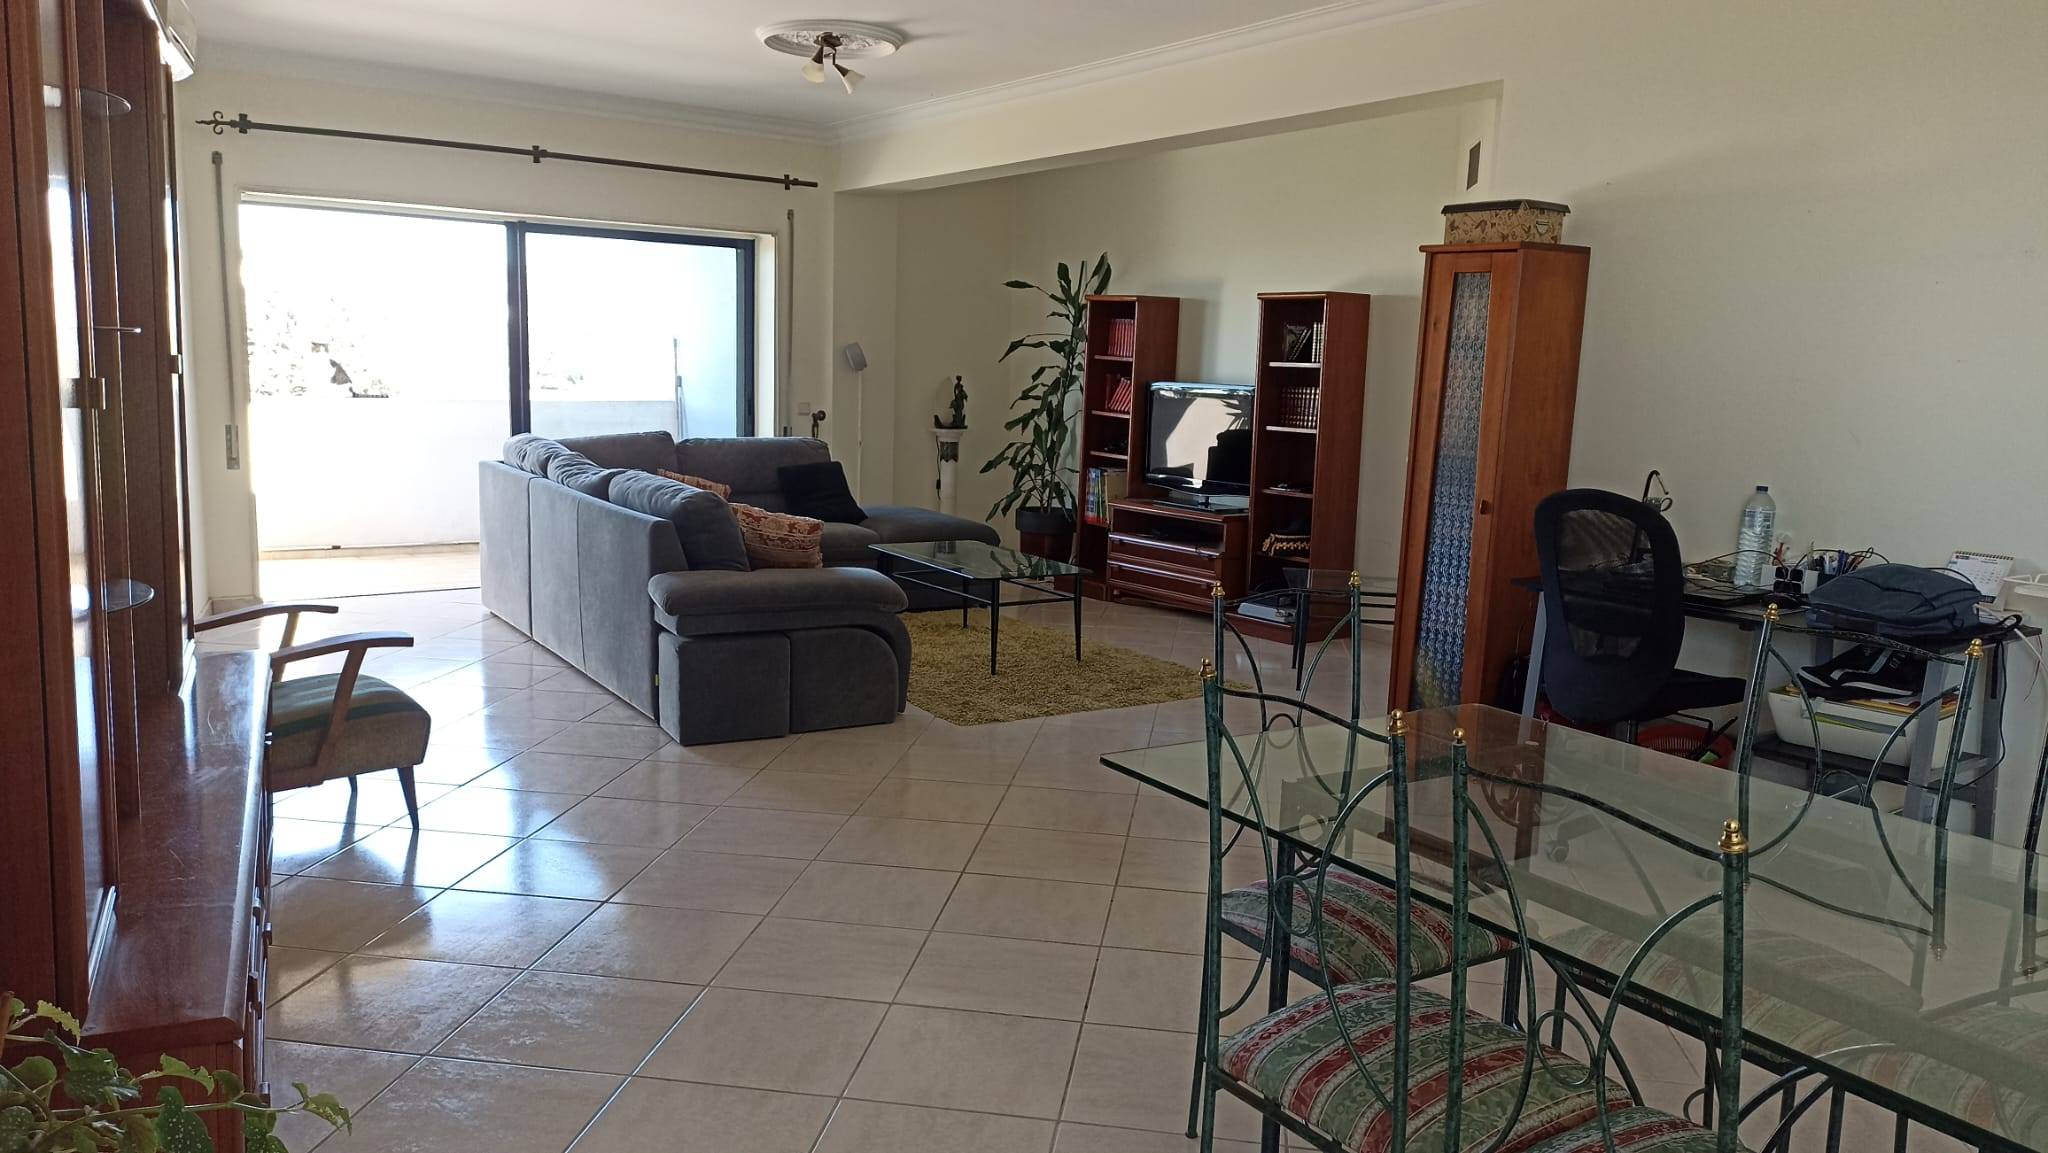 3 Bedroom Apartment with Parking Garage and Storages - Loulé